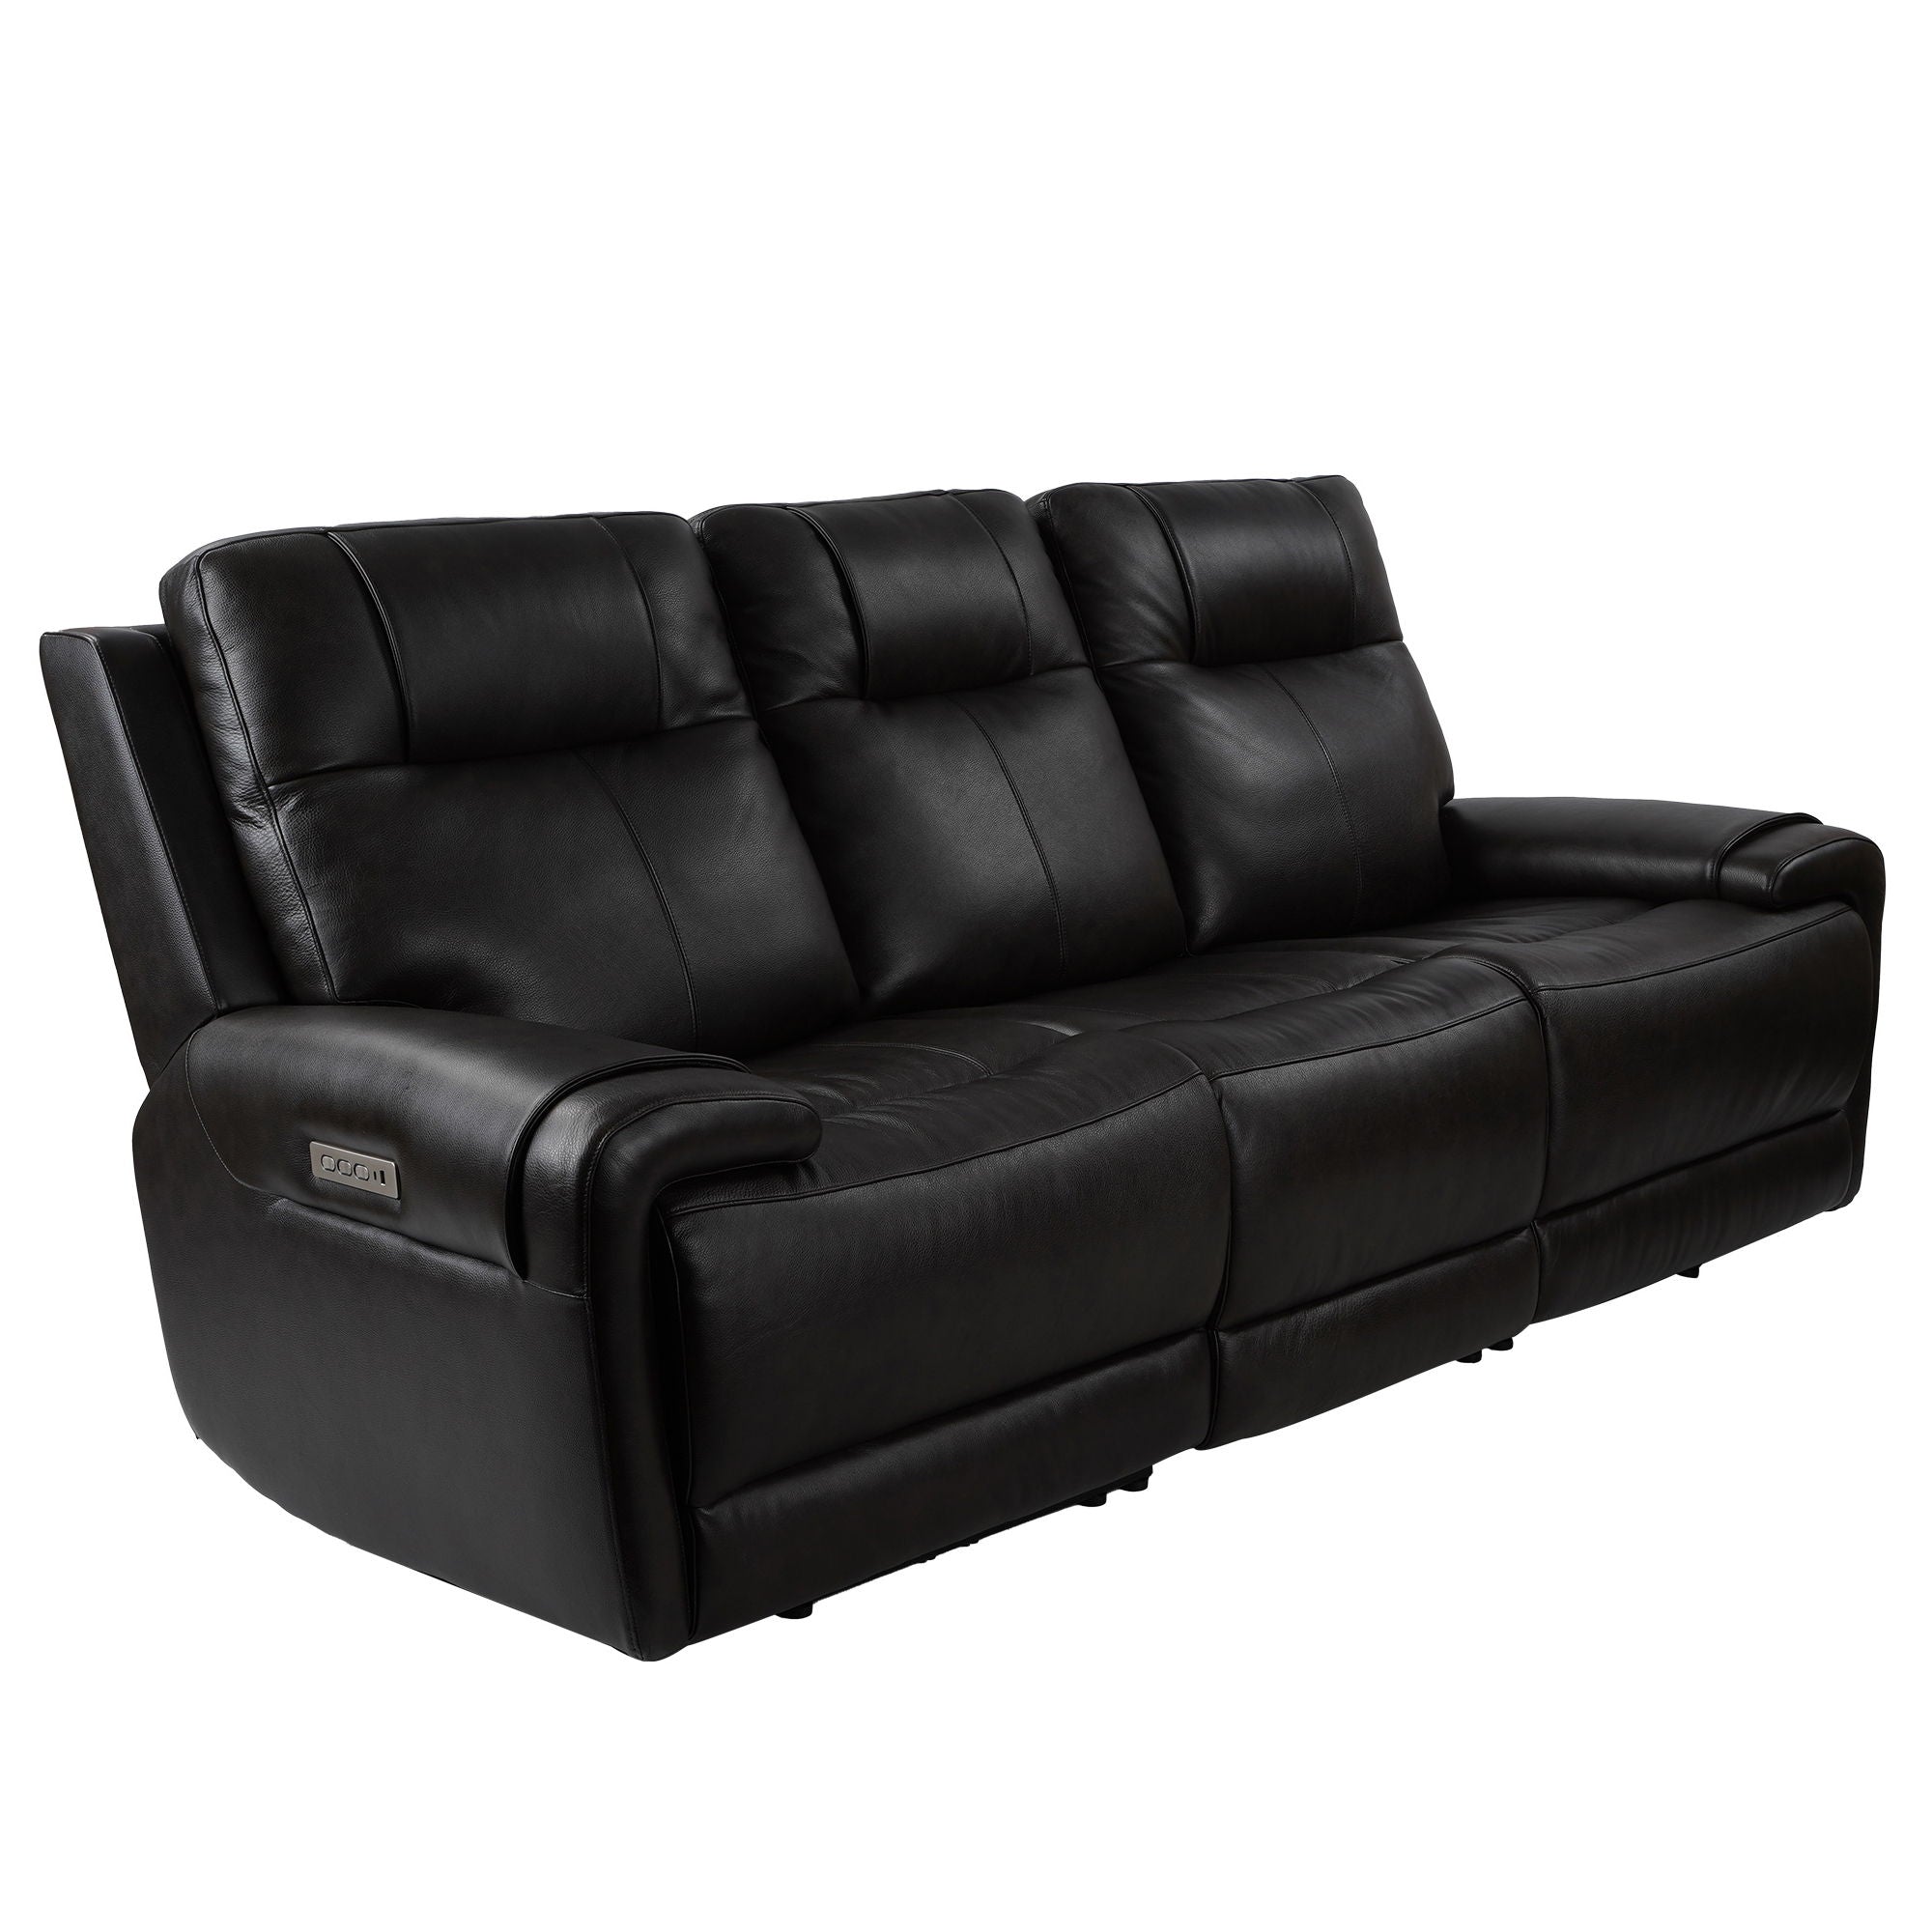 Trevor Triple Power Sofa | Genuine Leather | Lumbar Support | Adjustable Headrest | USB & Type C Charge Port | Middle Armless Chair Stationary